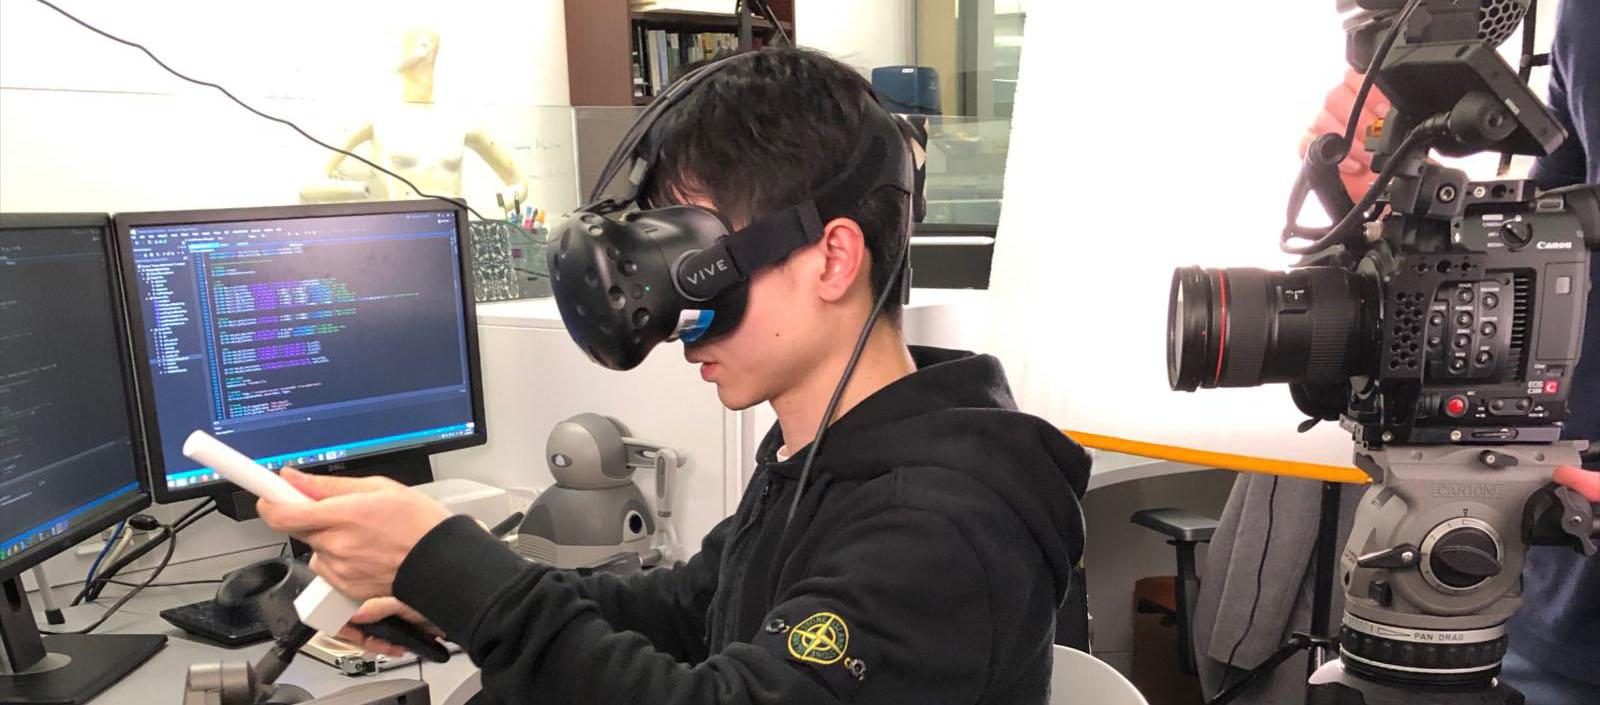 A student uses a VR headset